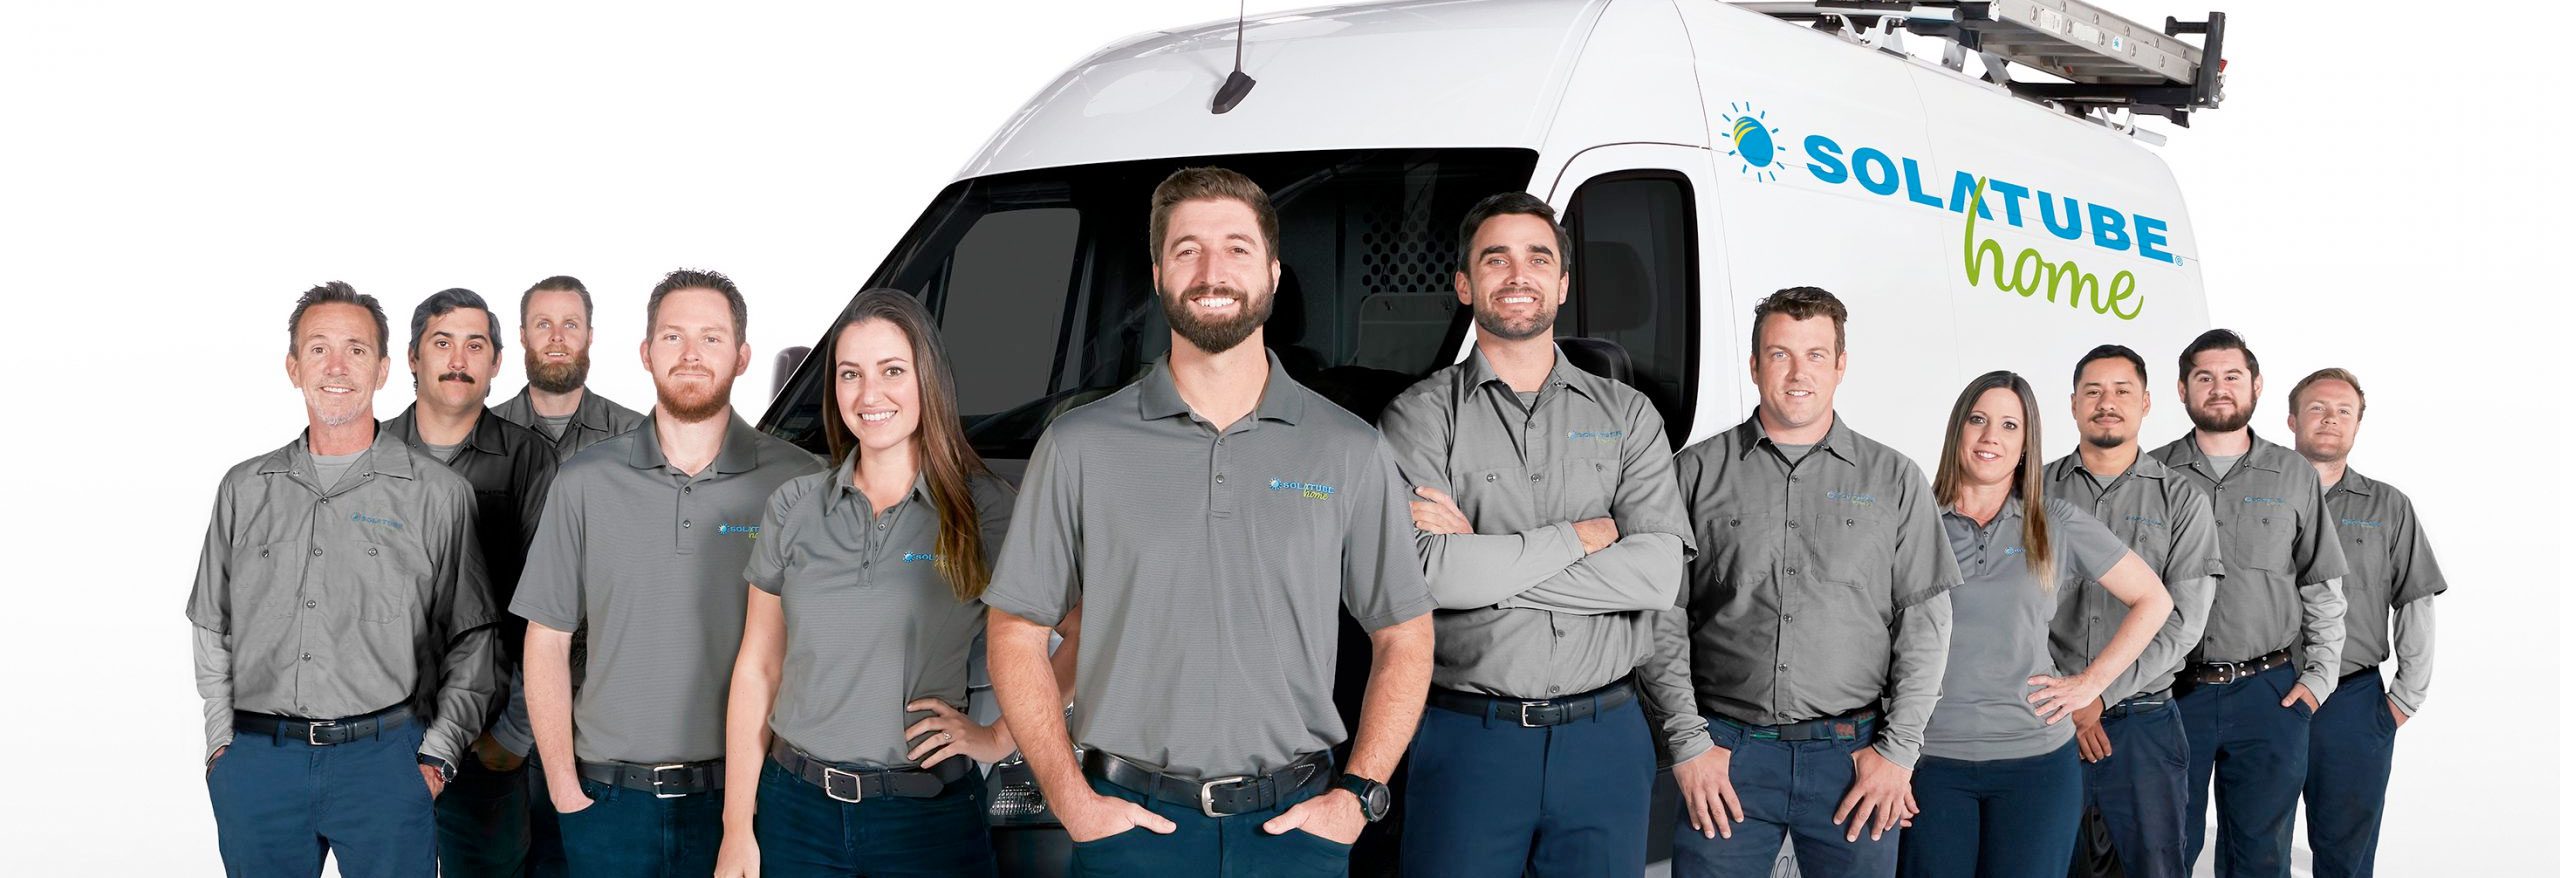 Solatube experts in front of truck